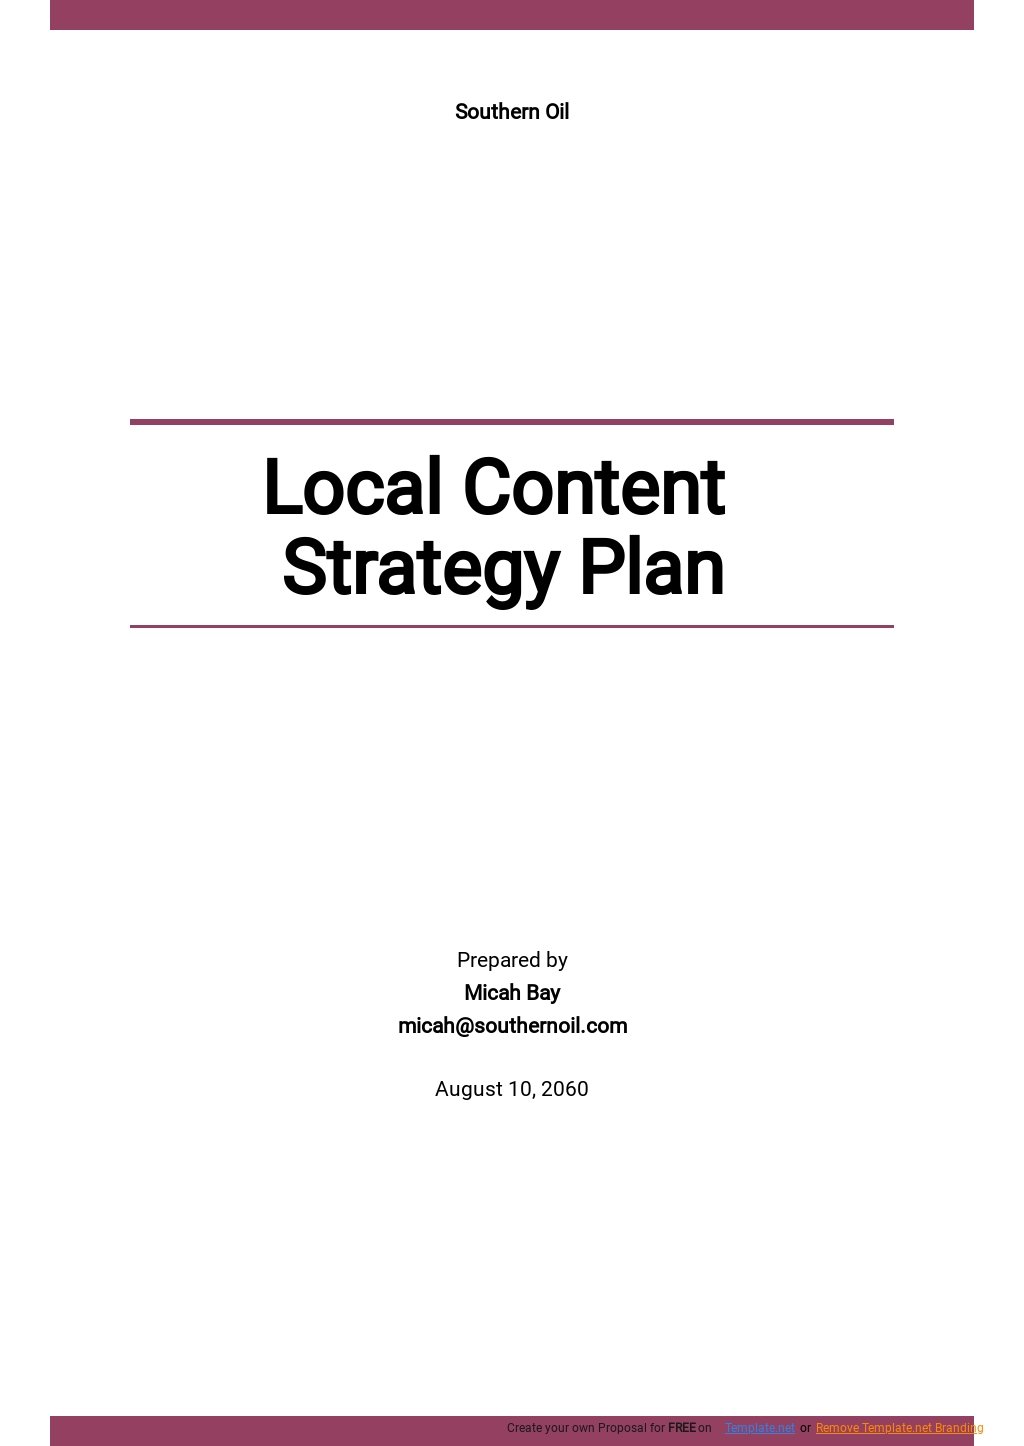 Local Content Strategy Plan Template